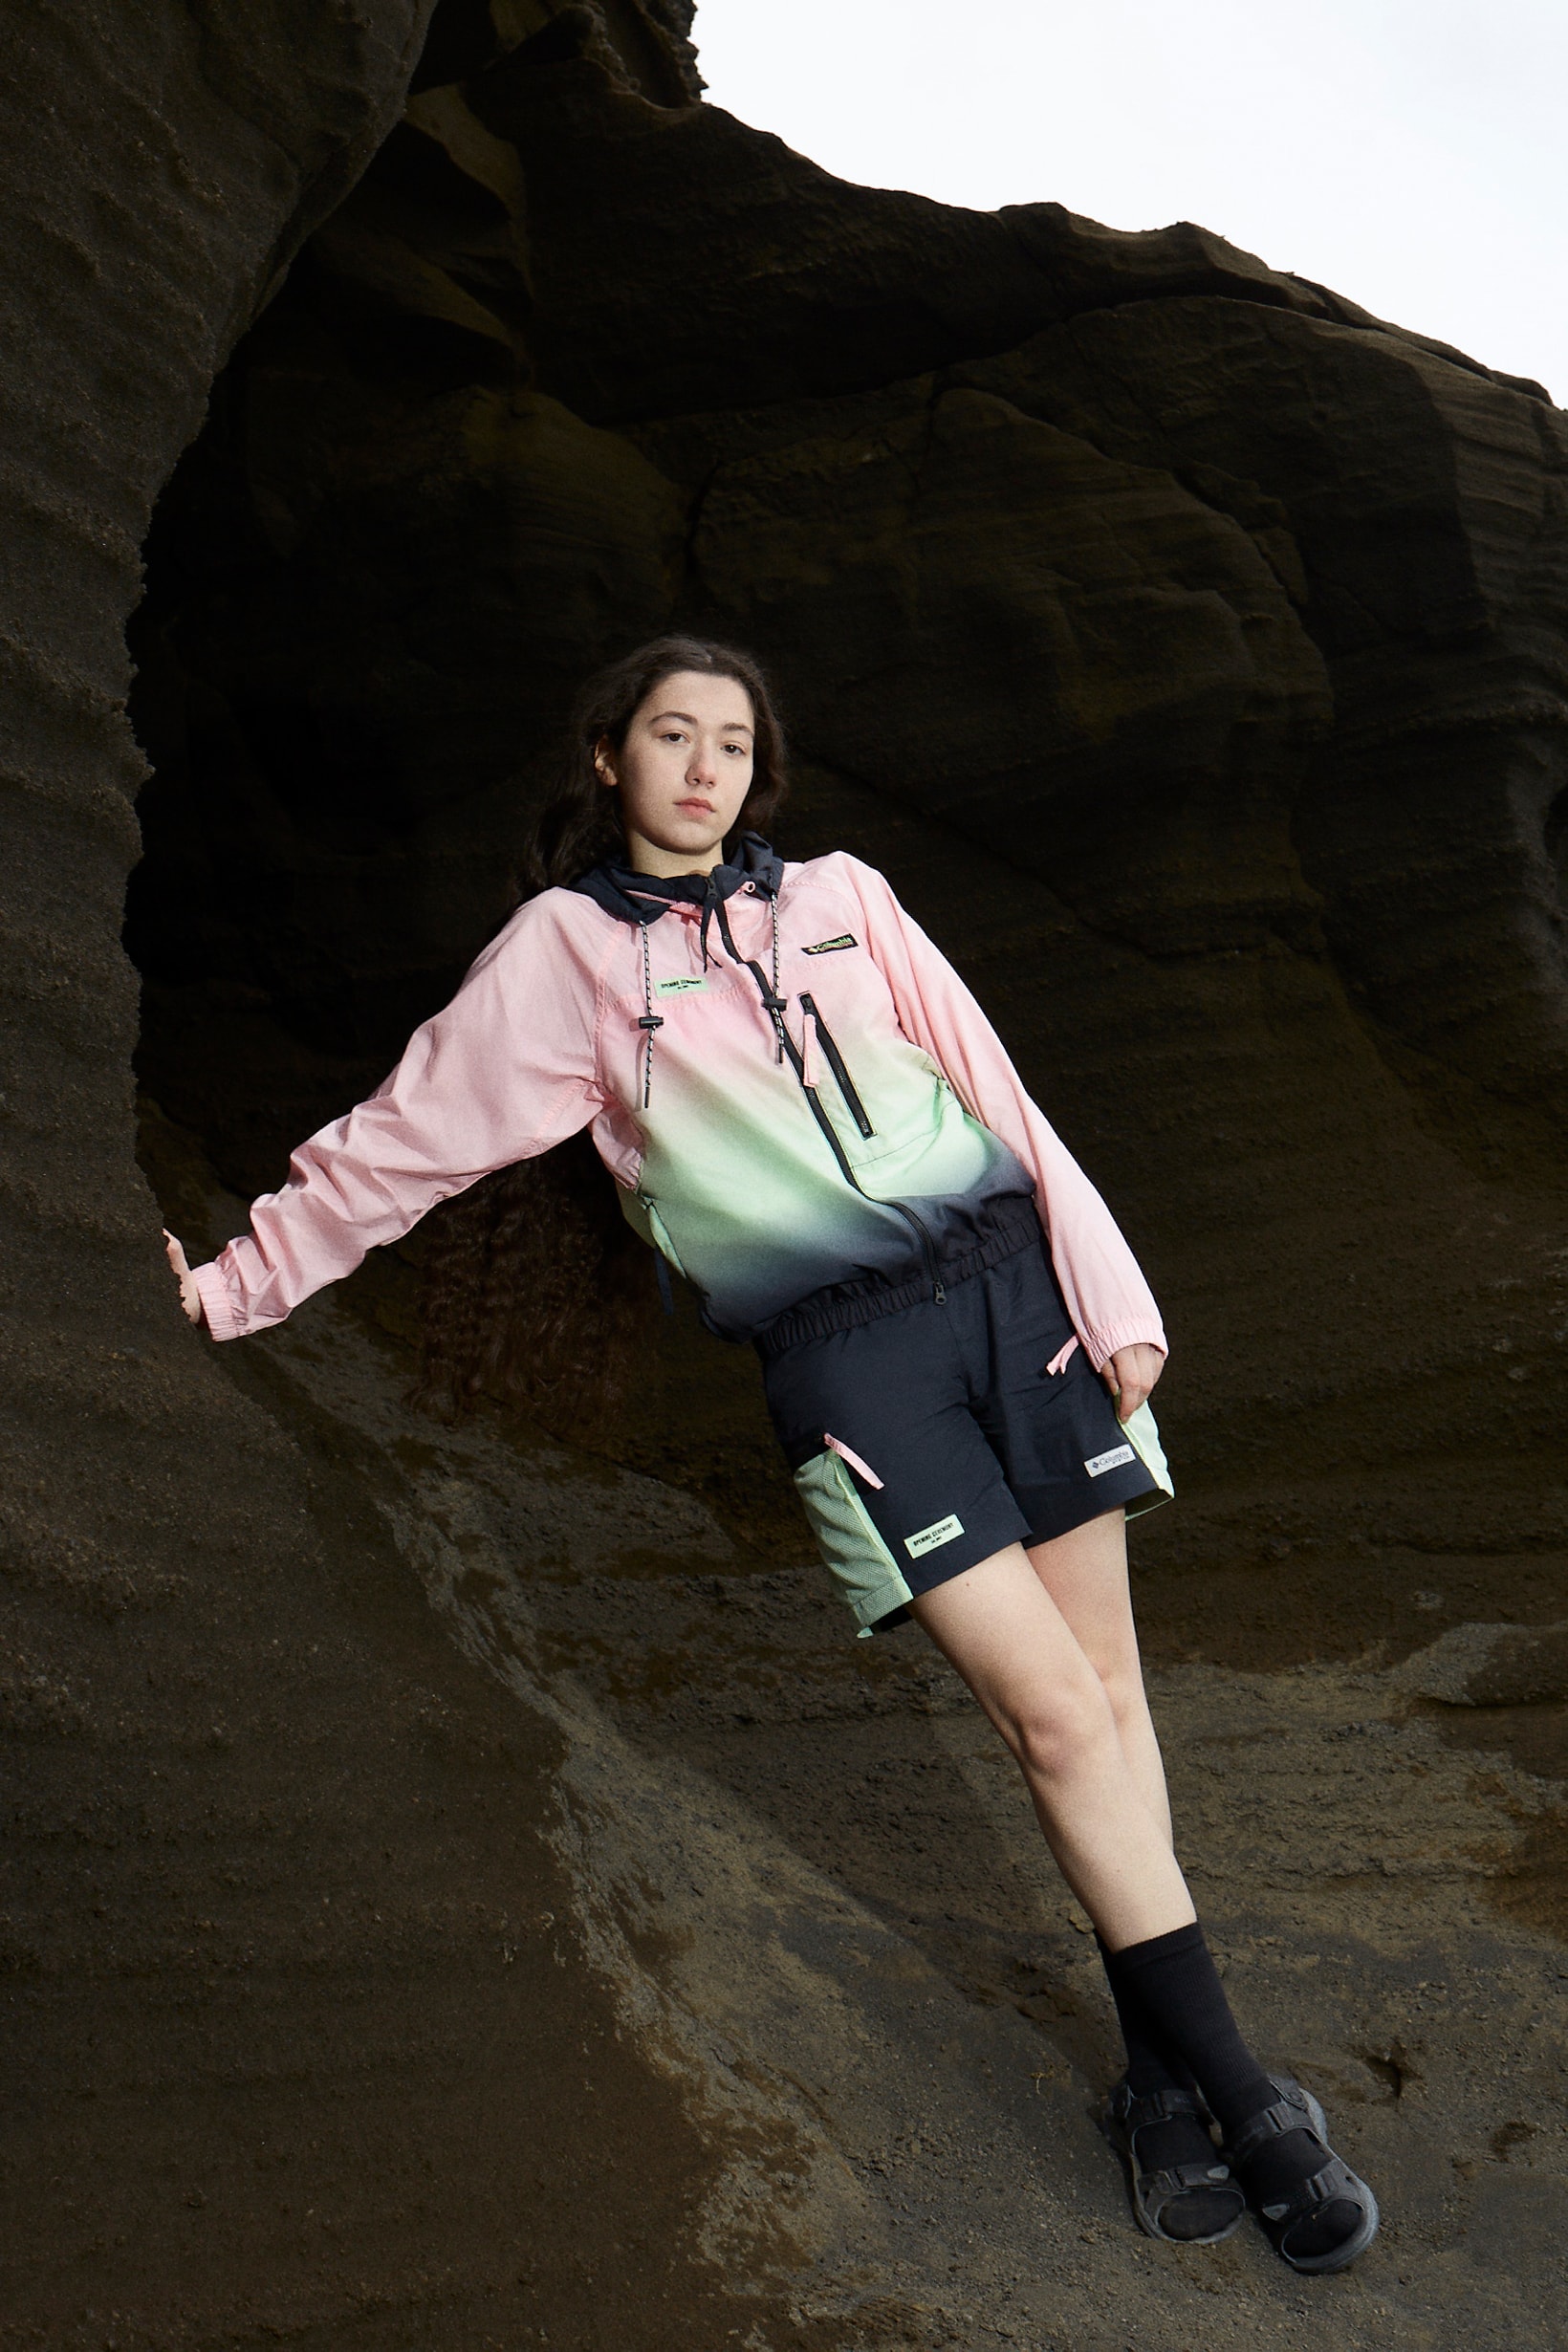 Opening Ceremony x Columbia Spring 2019 Capsule Collection Jacket Pink Green Shorts Black